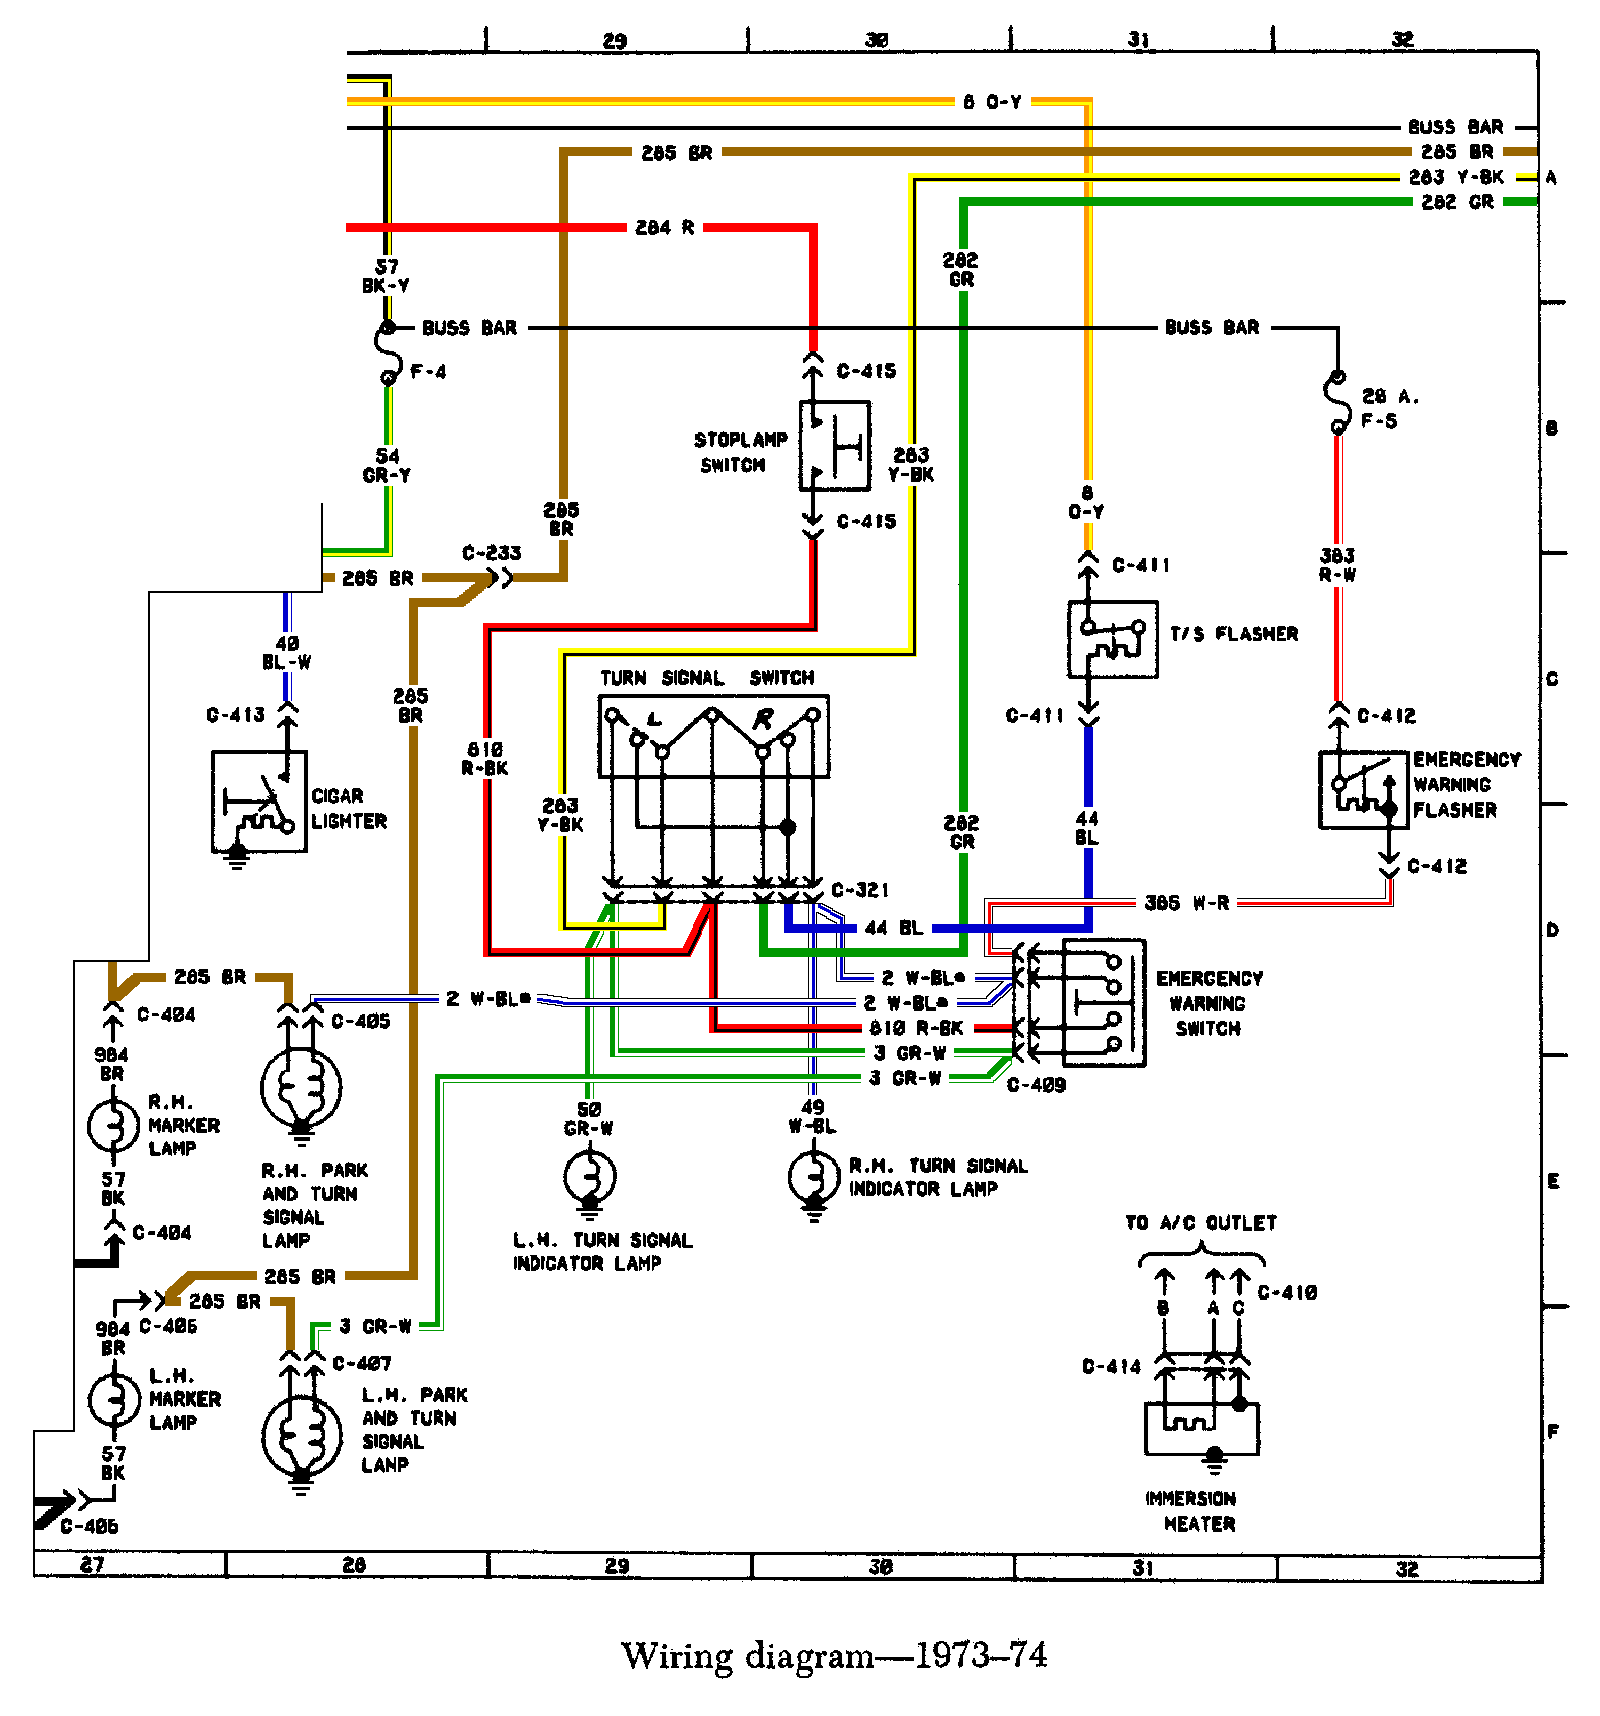 Ford F450 Turn Signal Switch Wiring Diagram from seabiscuit68.tripod.com